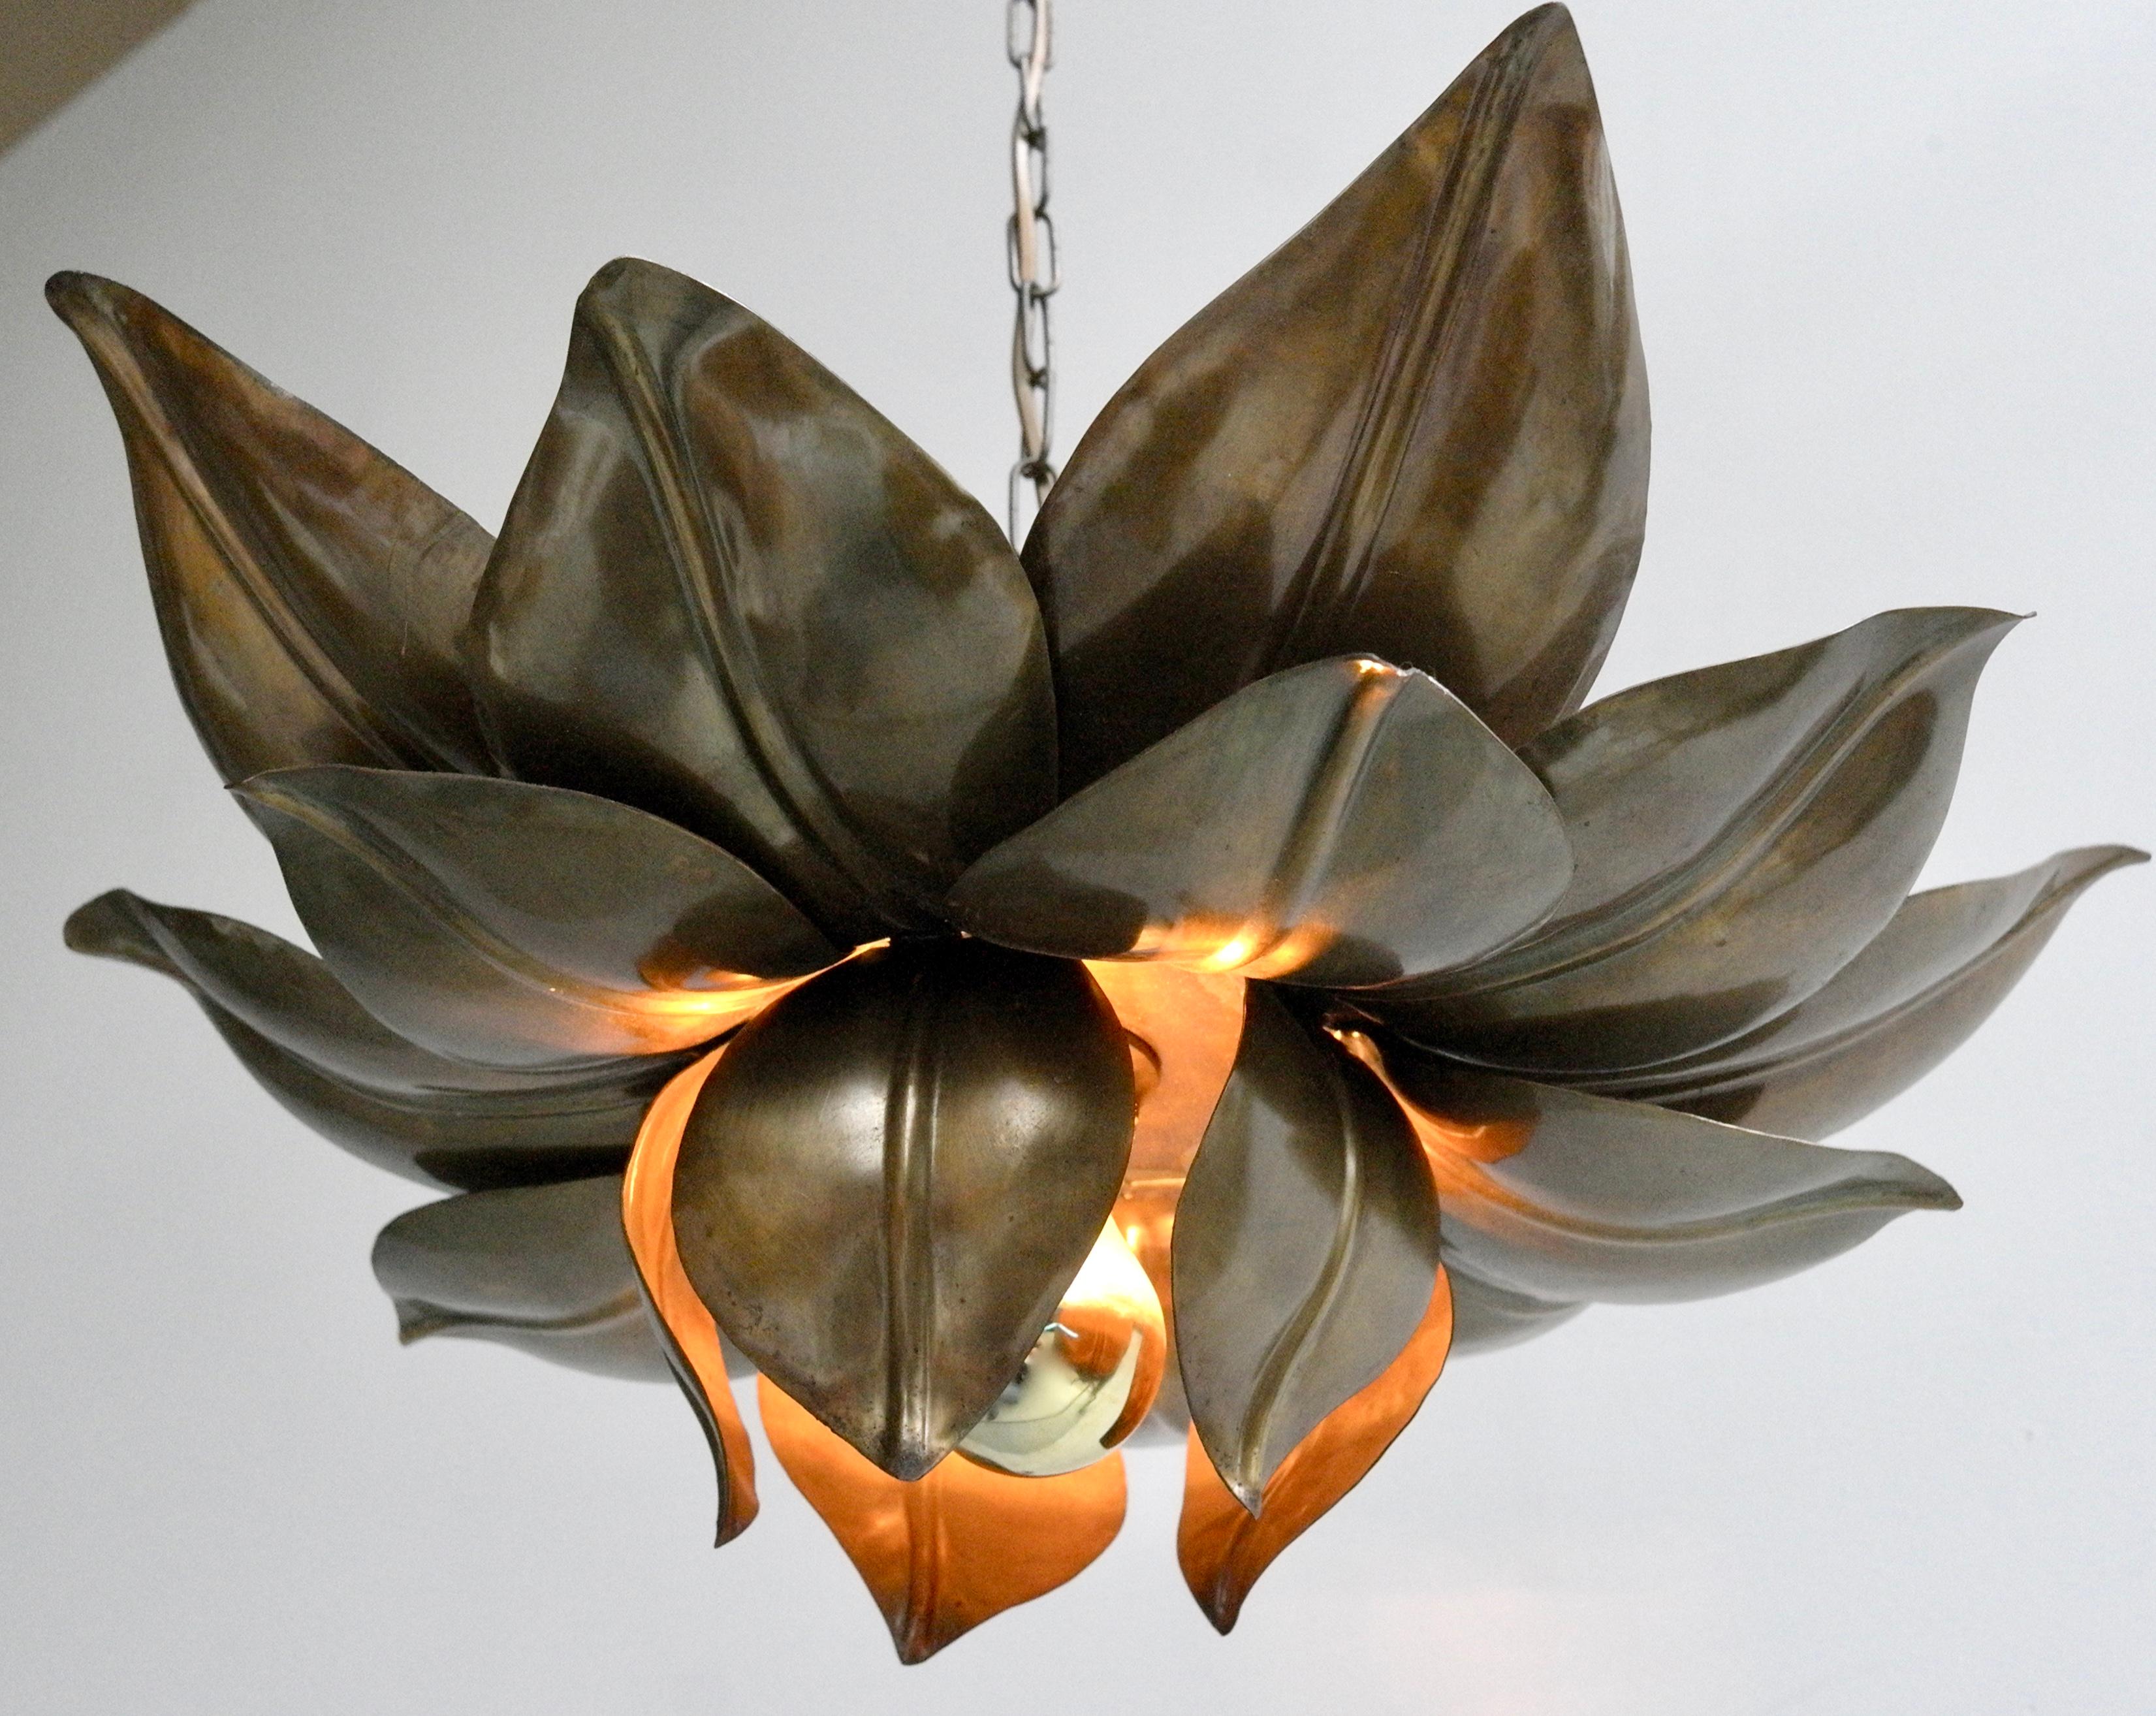 Artichoke Mid-Century Modern copper chandelier pendant lamp, 1960s.

Measures: Diameter 53 cm, shade height 25, total height including the chain 85 cm.